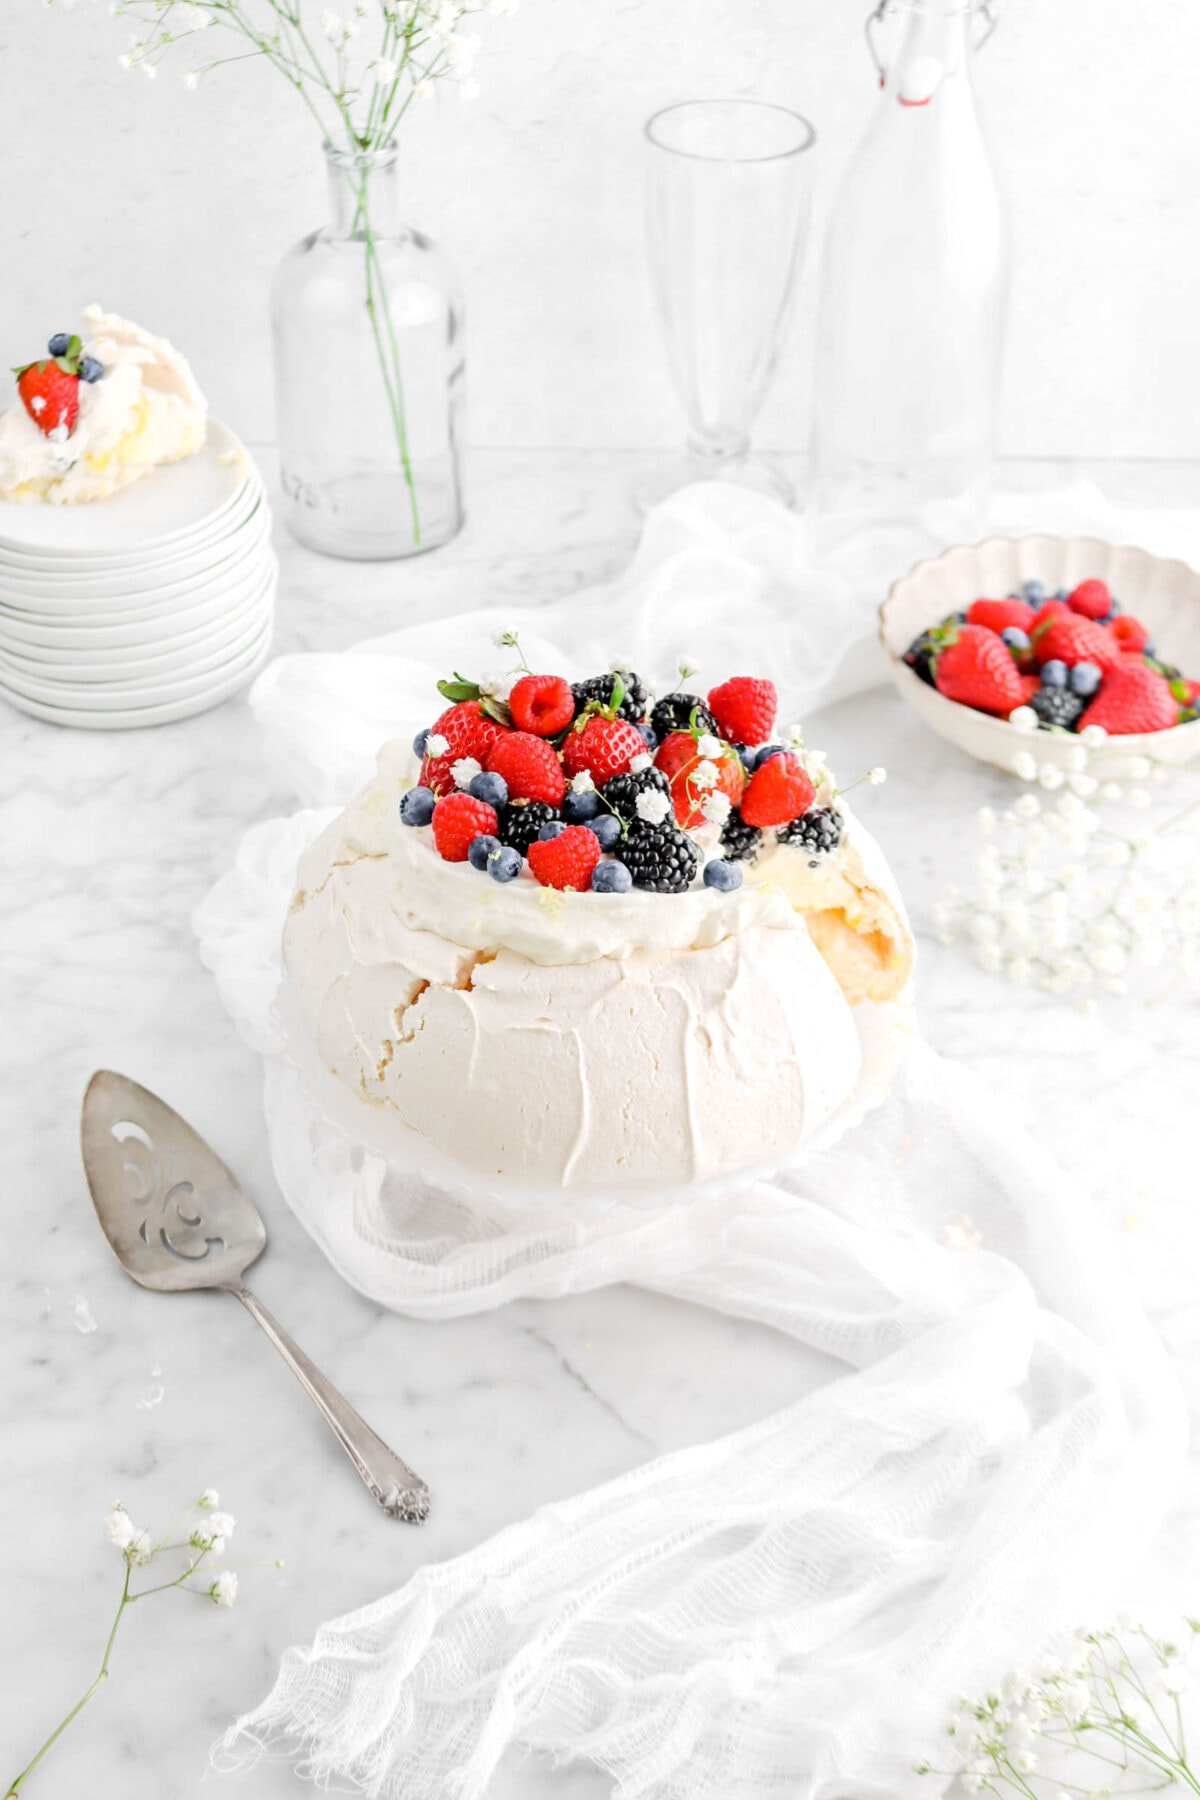 angled photo of pavlova with slice on stack of white plates behind, mixed berries in a bowl, white cheese cloth underneath cake plate, and white flowers around